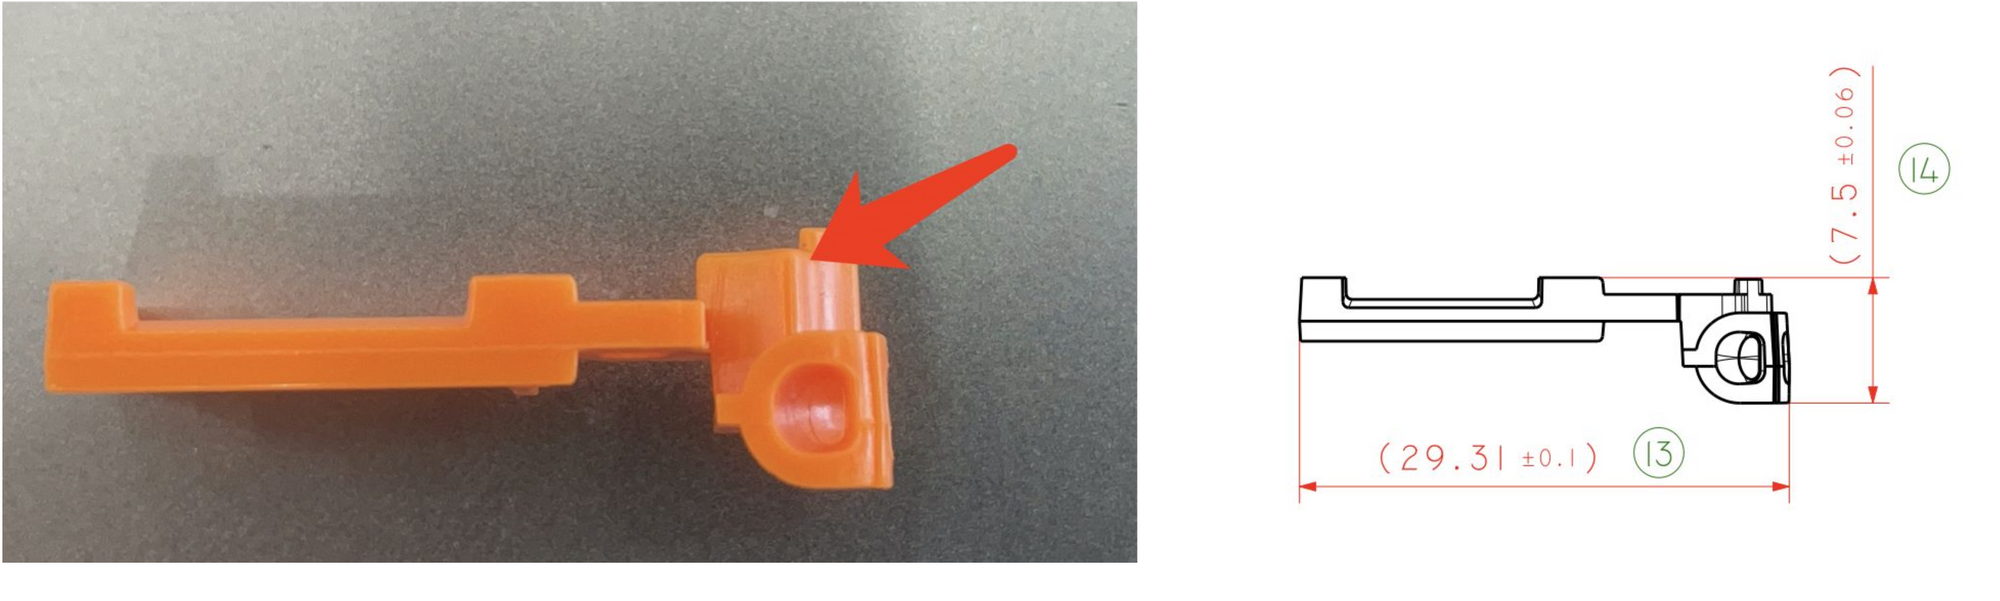 The part doesn’t match the drawing which leads to assembly failure